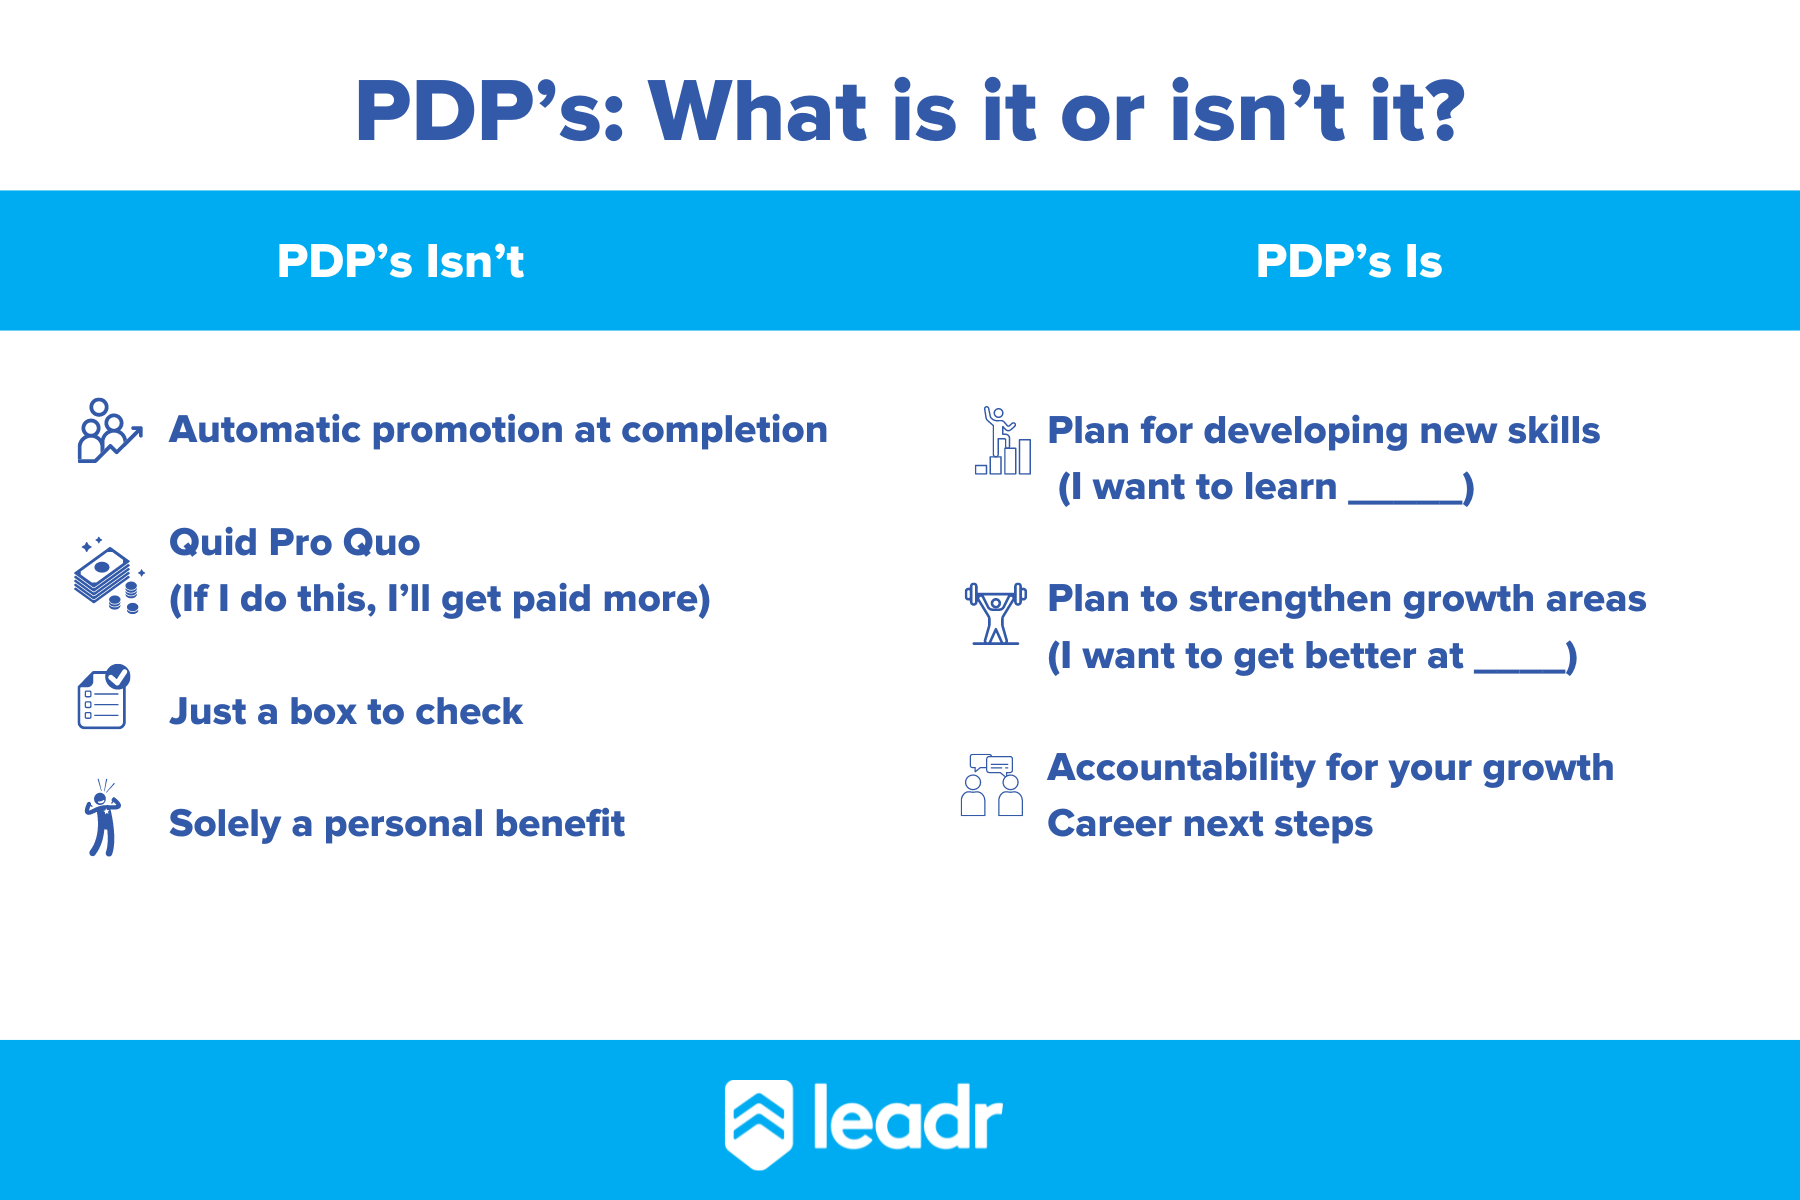 PDPs What they are and are not